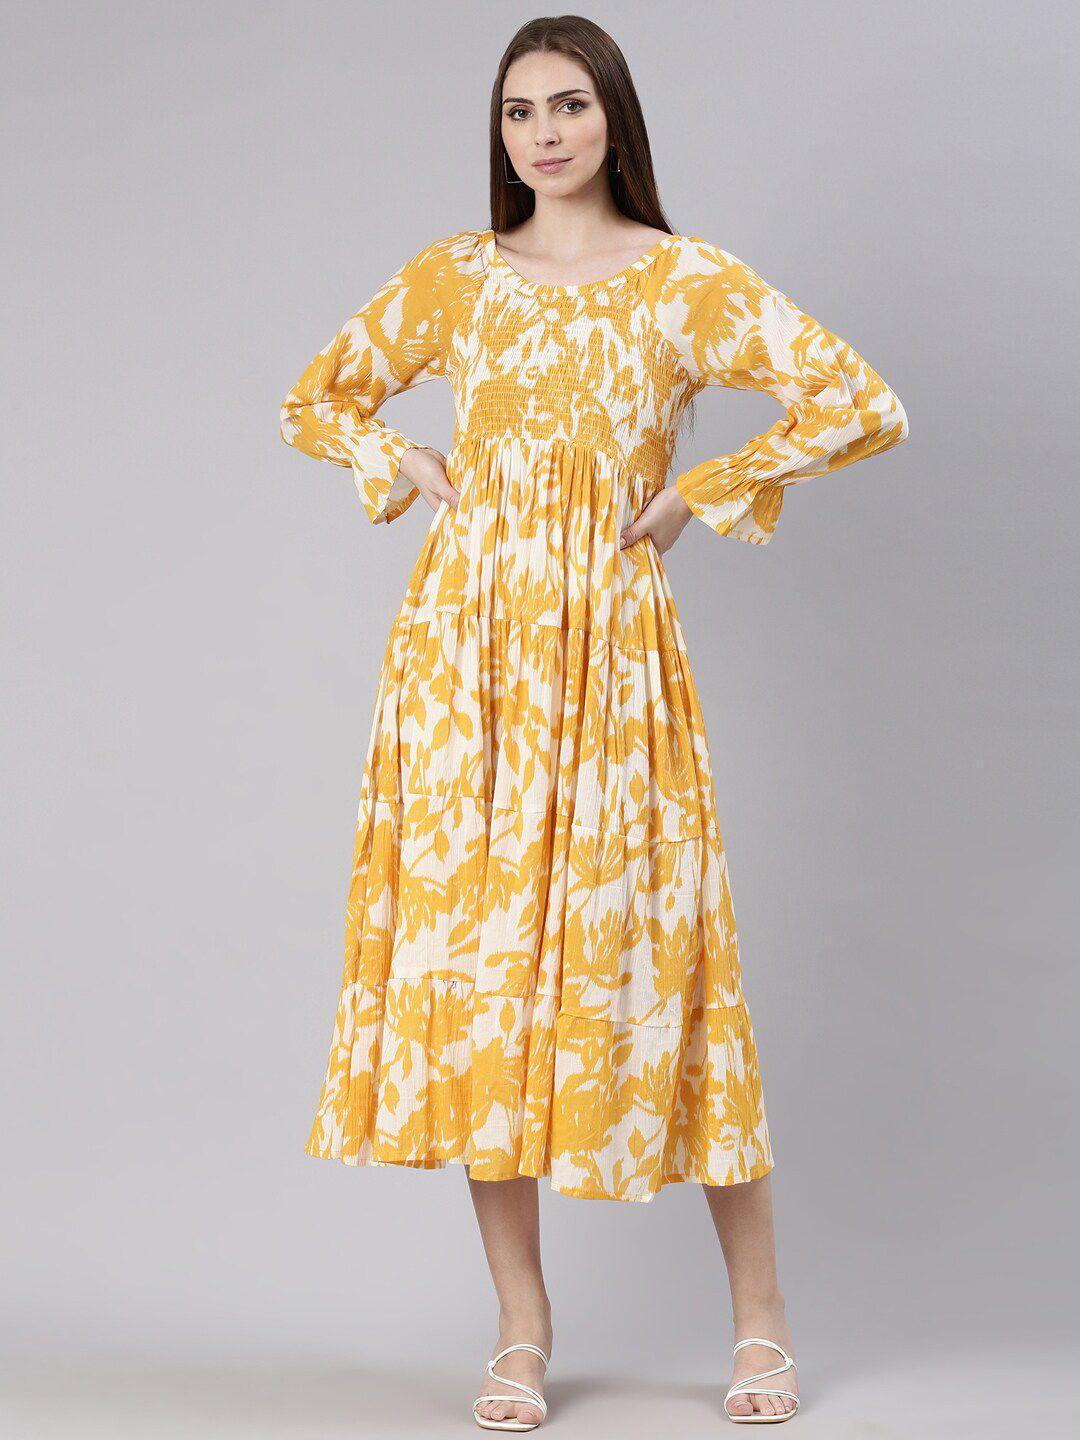 showoff-floral-printed-bell-sleeves-smocked-fit-and-flare-midi-dress